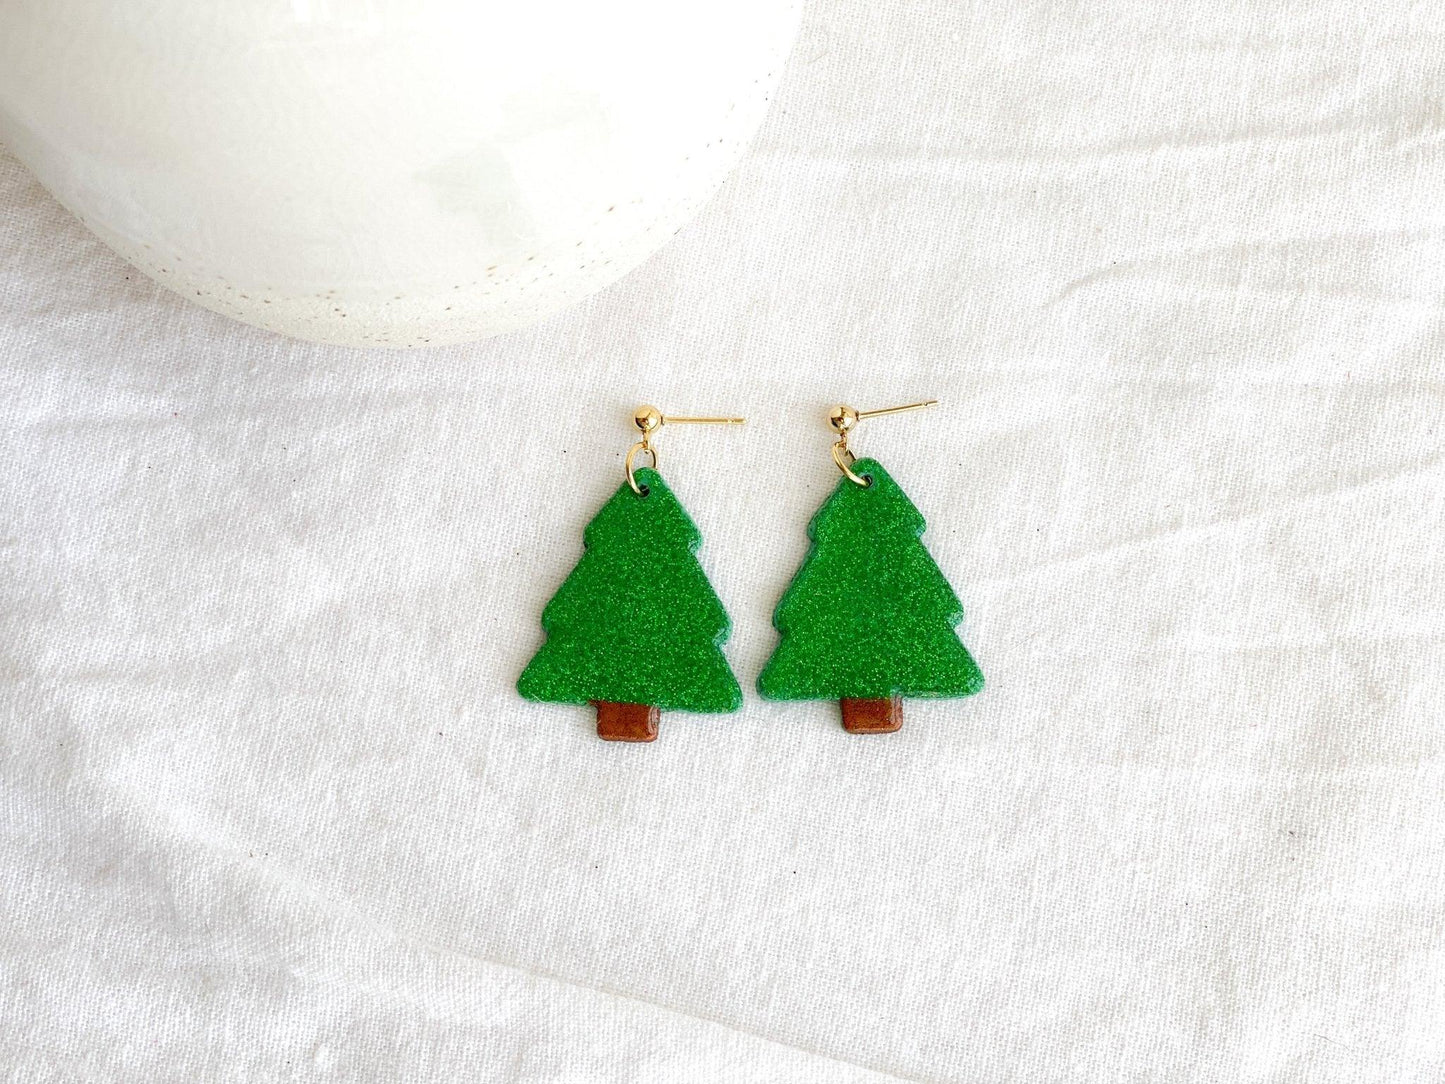 handmade earrings that are sparkly green christmas trees attached to gold ball posts on earring card on white linen cloth